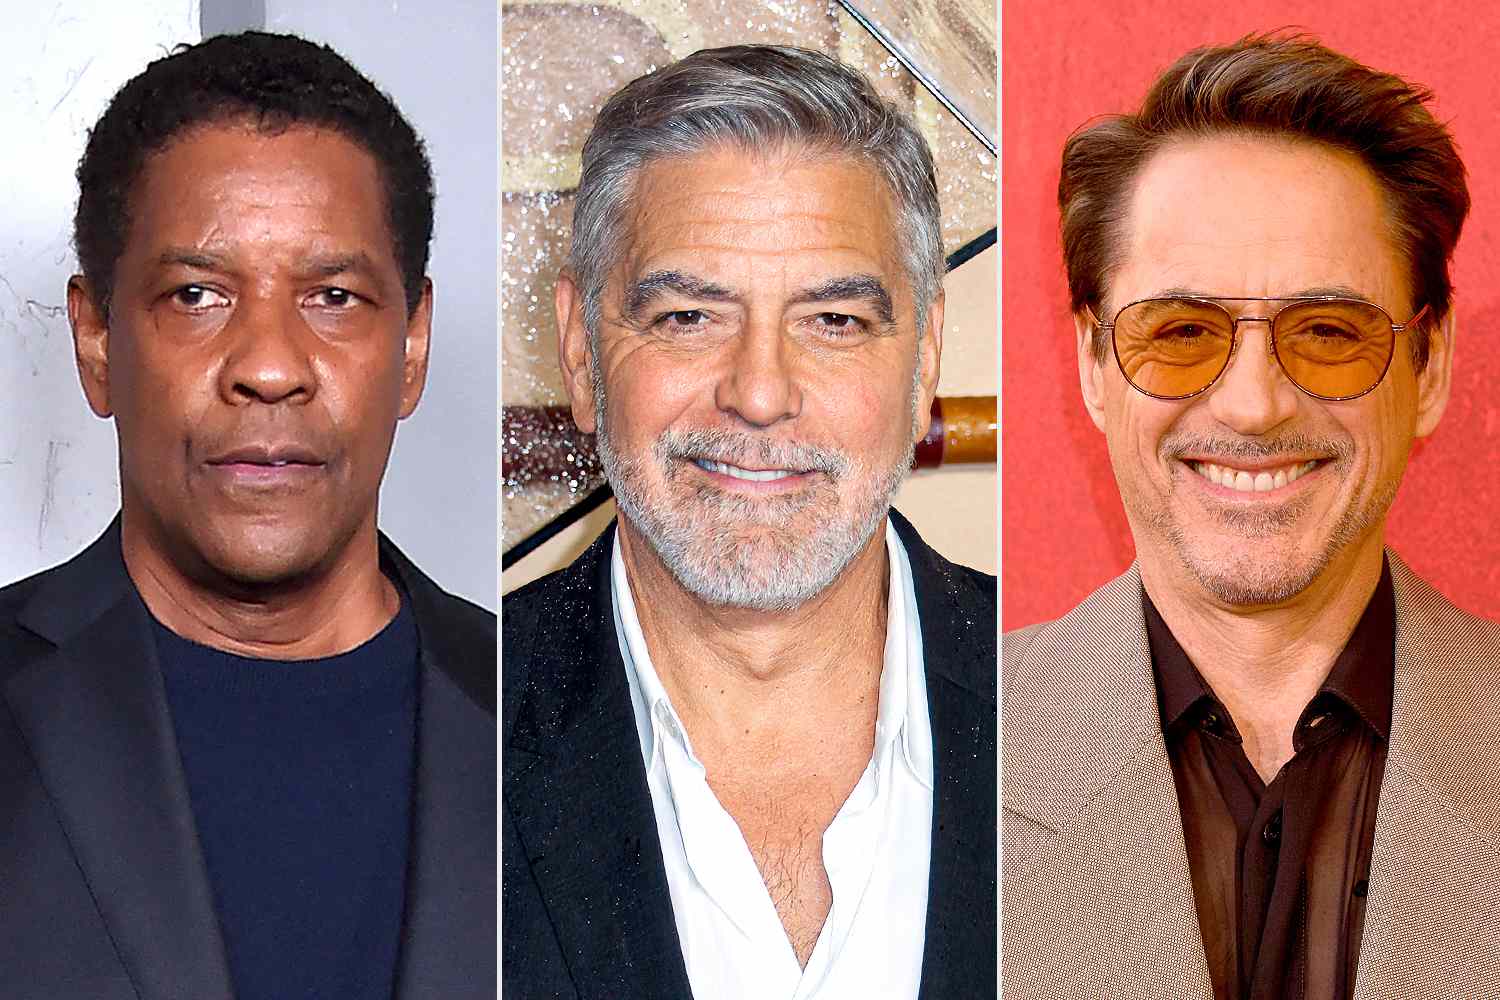 George Clooney, Denzel Washington, Robert Downey Jr. and All the Stars Heading to Broadway